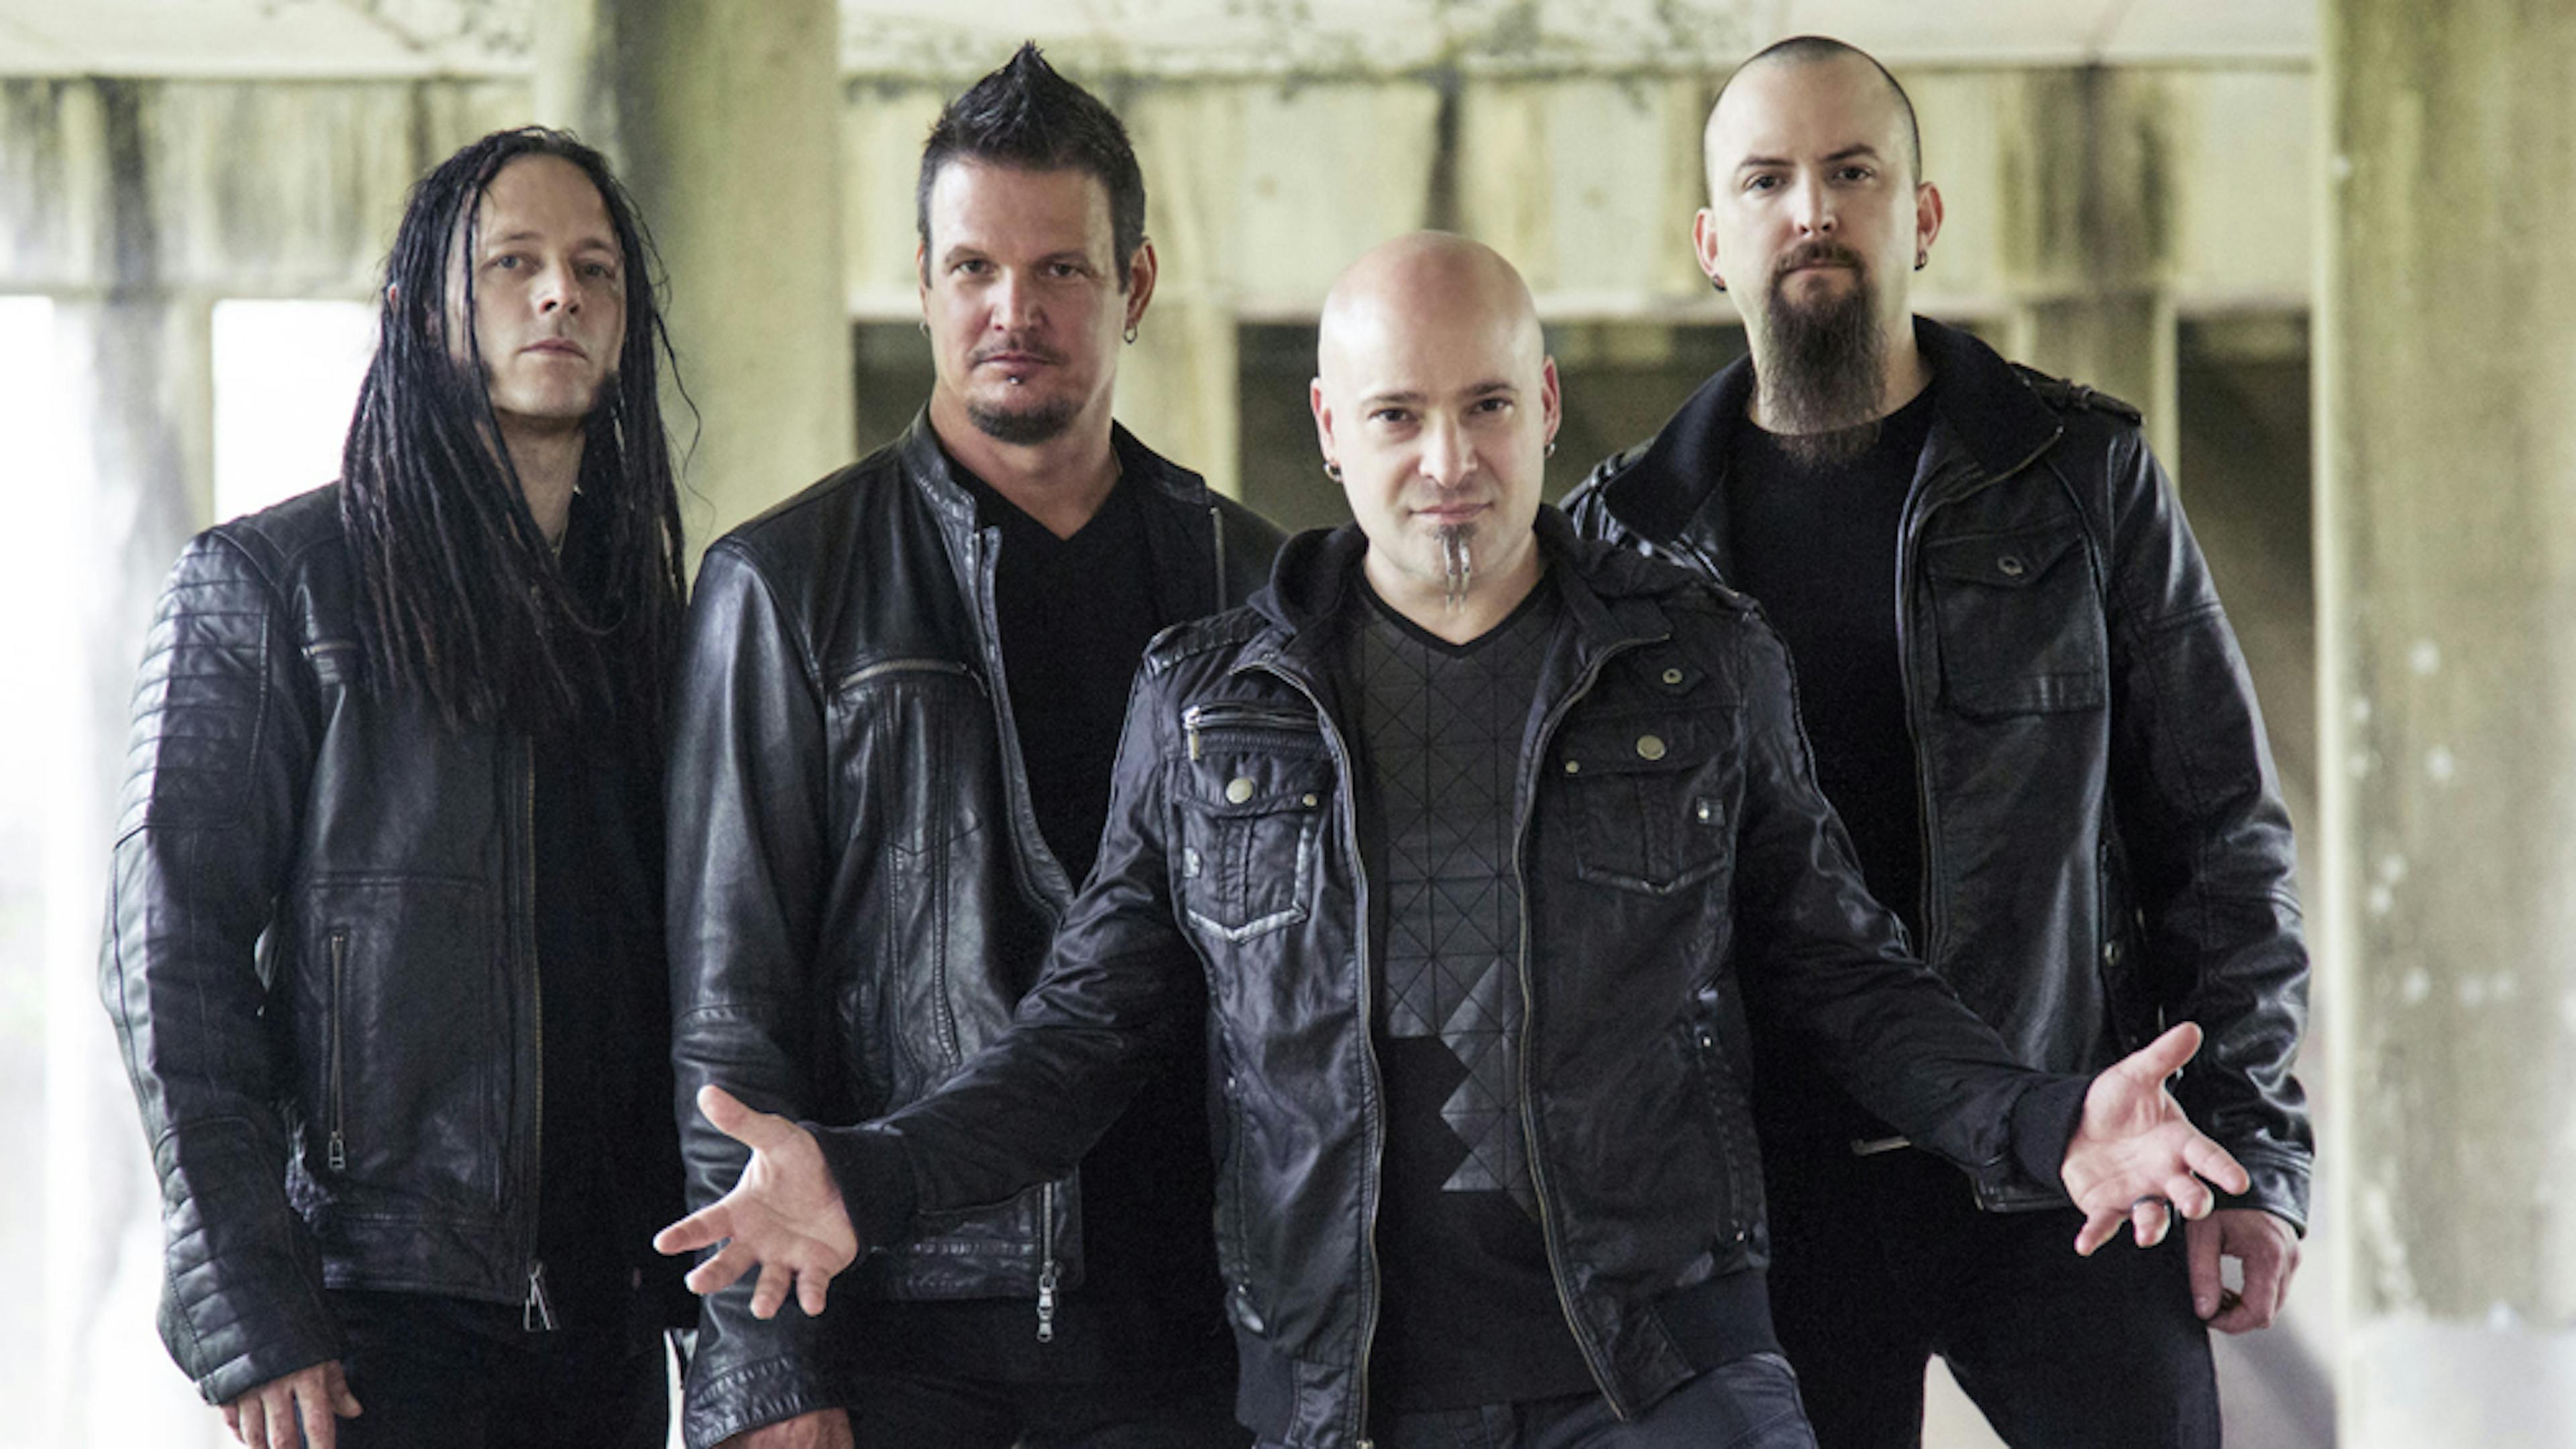 Disturbed Are Teasing New Music